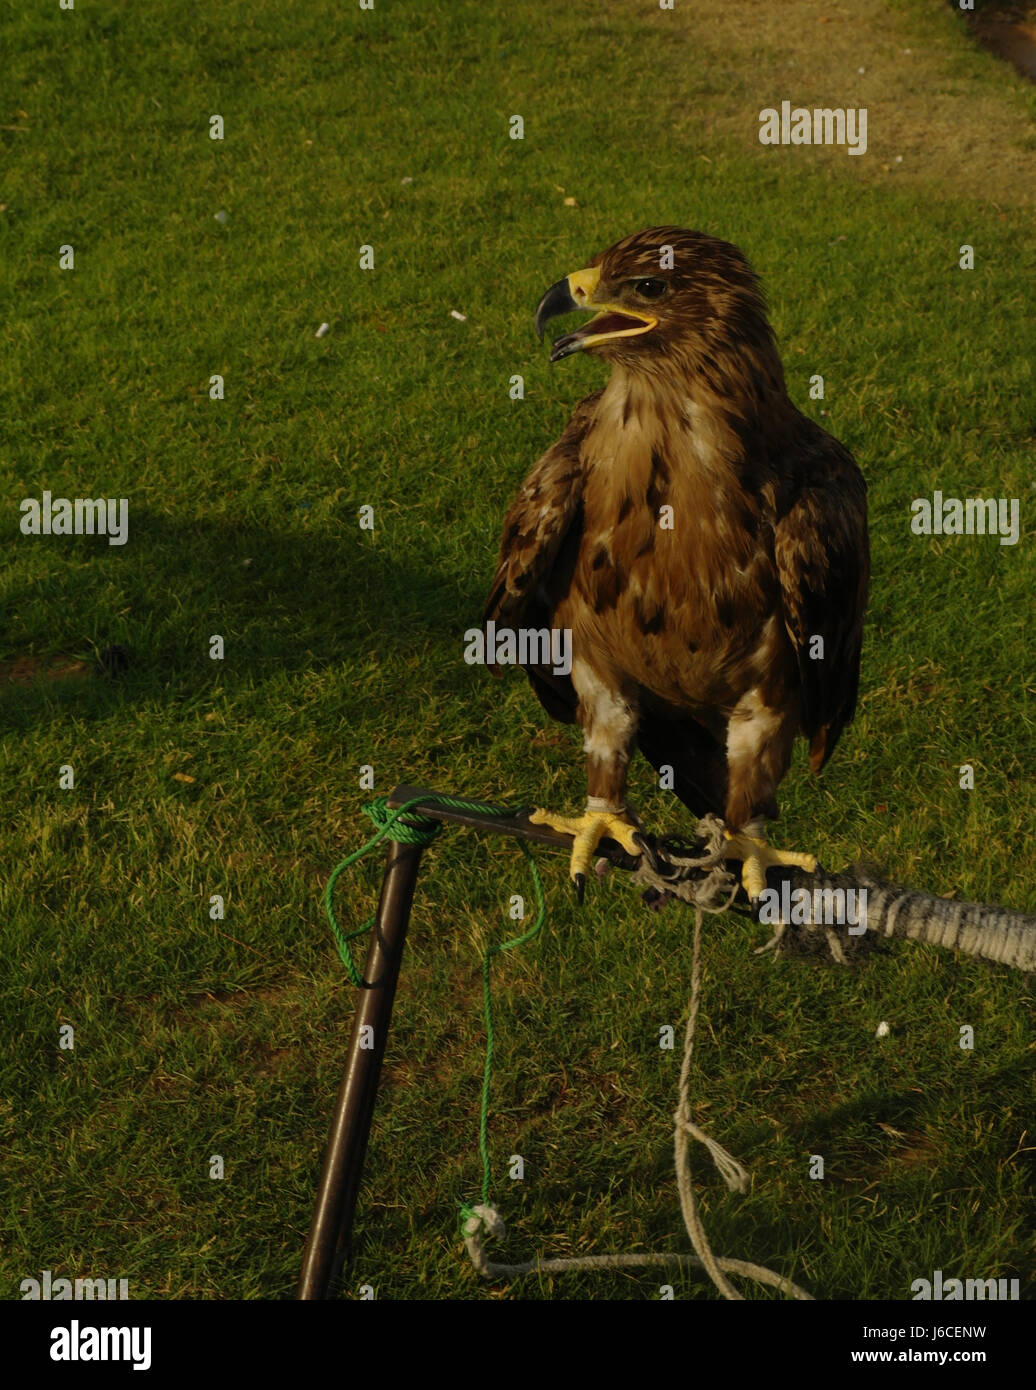 Common Buzzard, with open mouth and head turned right, tethered and standing metal stand on grass expanse, Al Badayer, Dubai-Hatta Road, Dubai, UAE Stock Photo